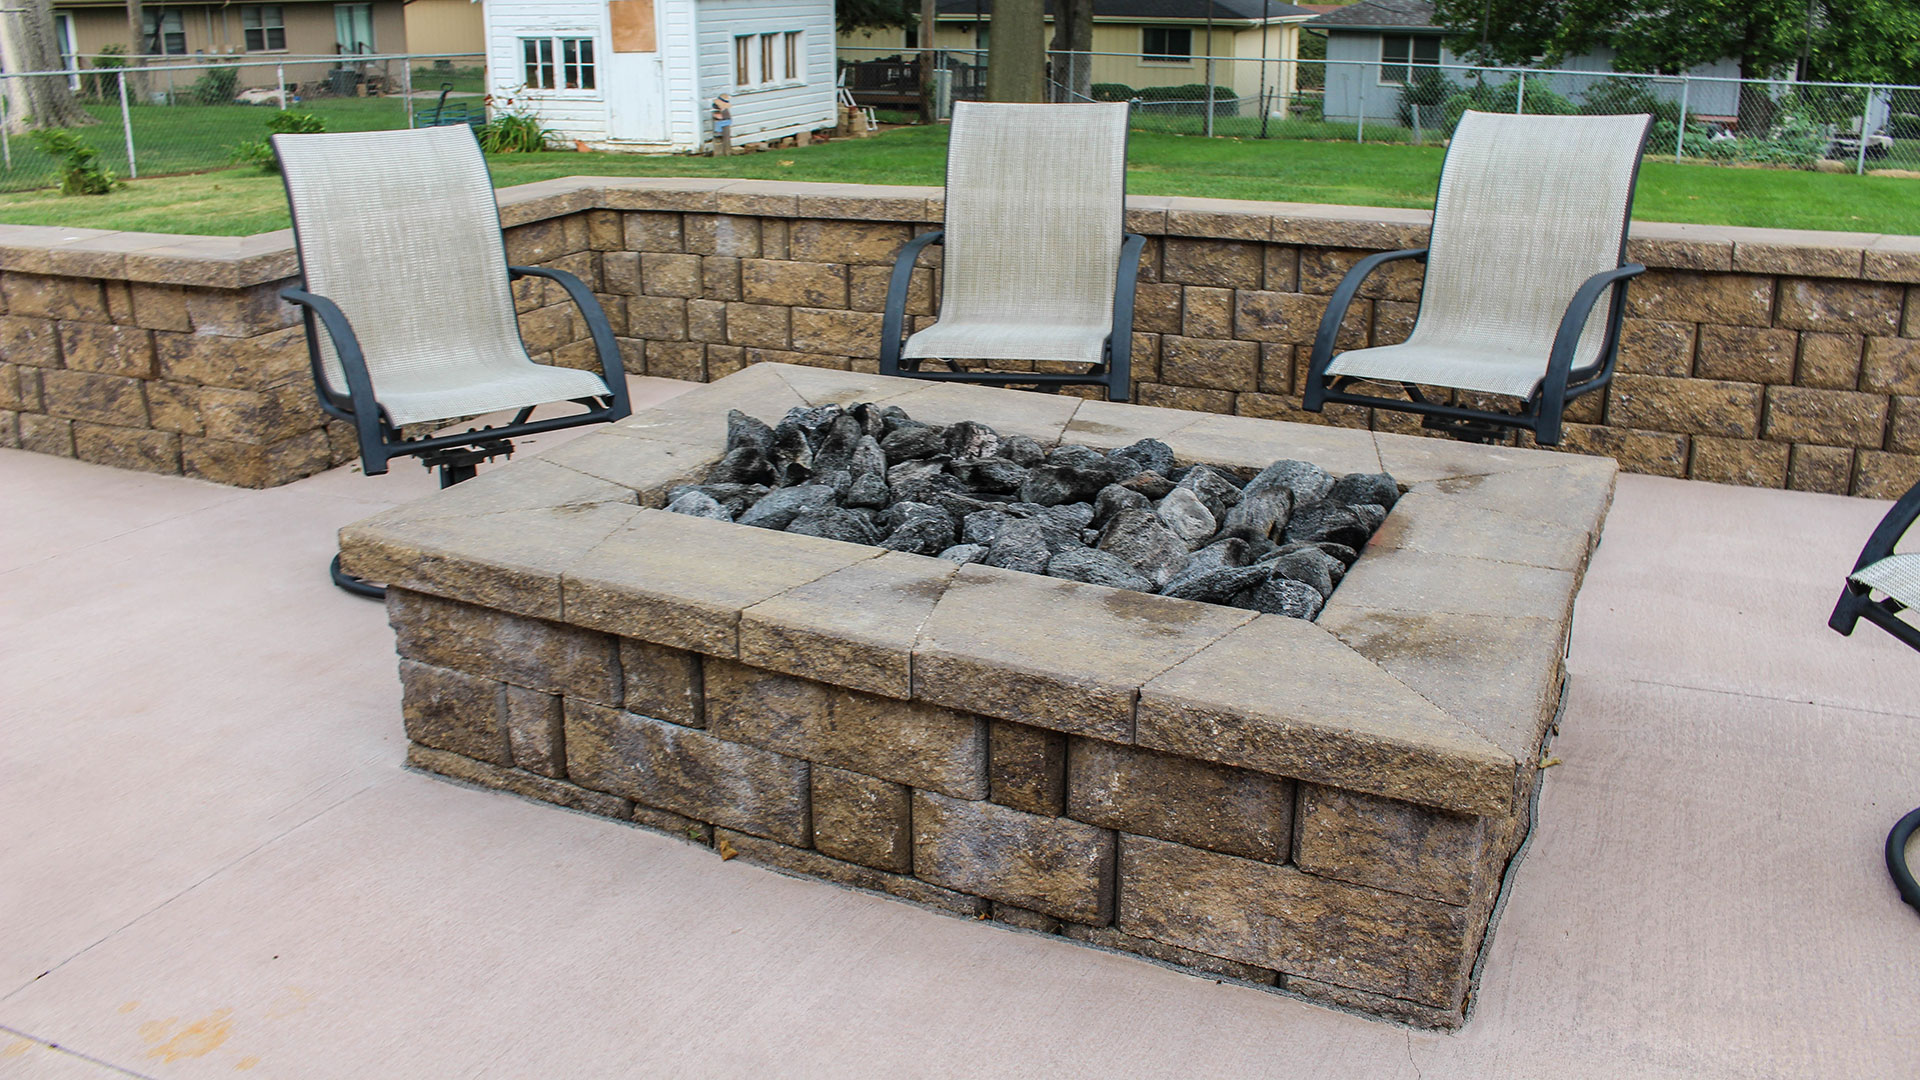 A stone outdoor fire pit on a patio surrounded by chairs and a retaining wall in Gretna, NE.